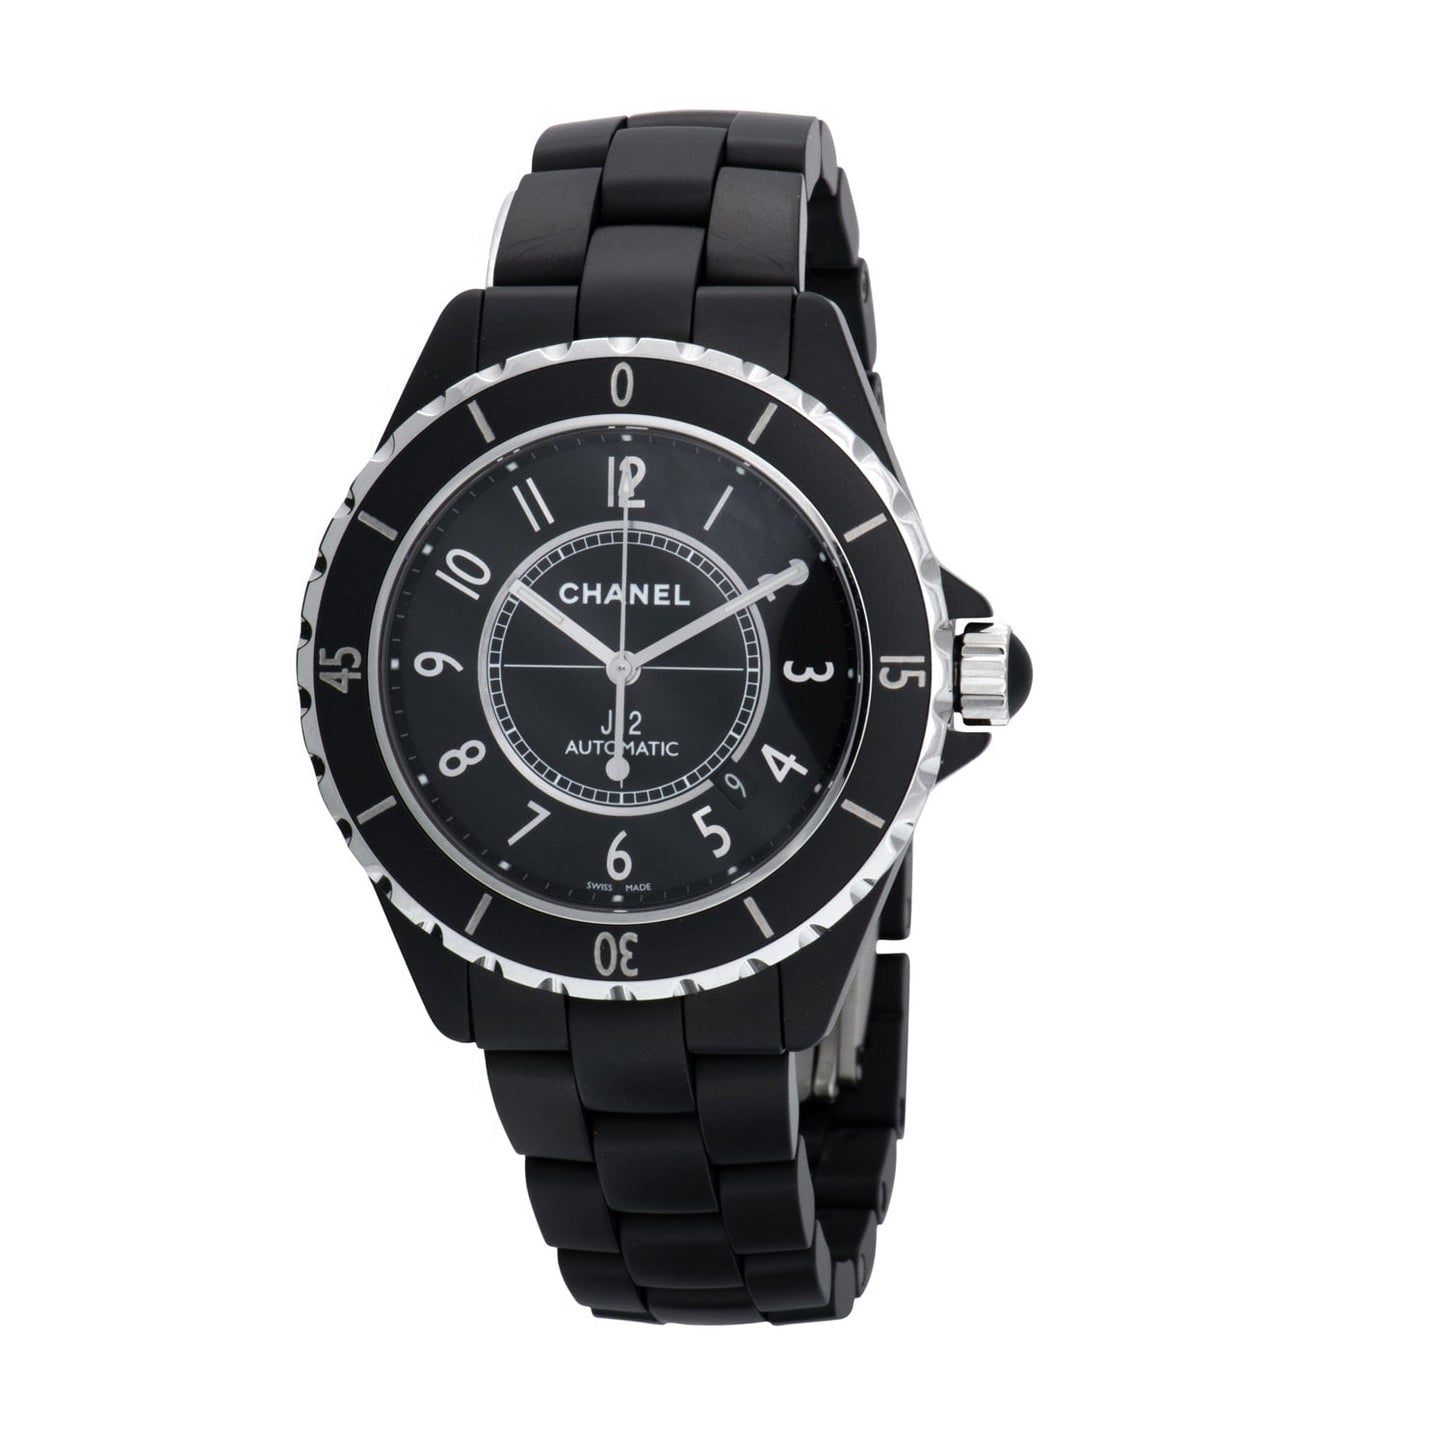 NOS Chanel J12 Black Ceramic & Steel 42mm Automatic Midsize Watch B/B H2980  - Jewels in Time